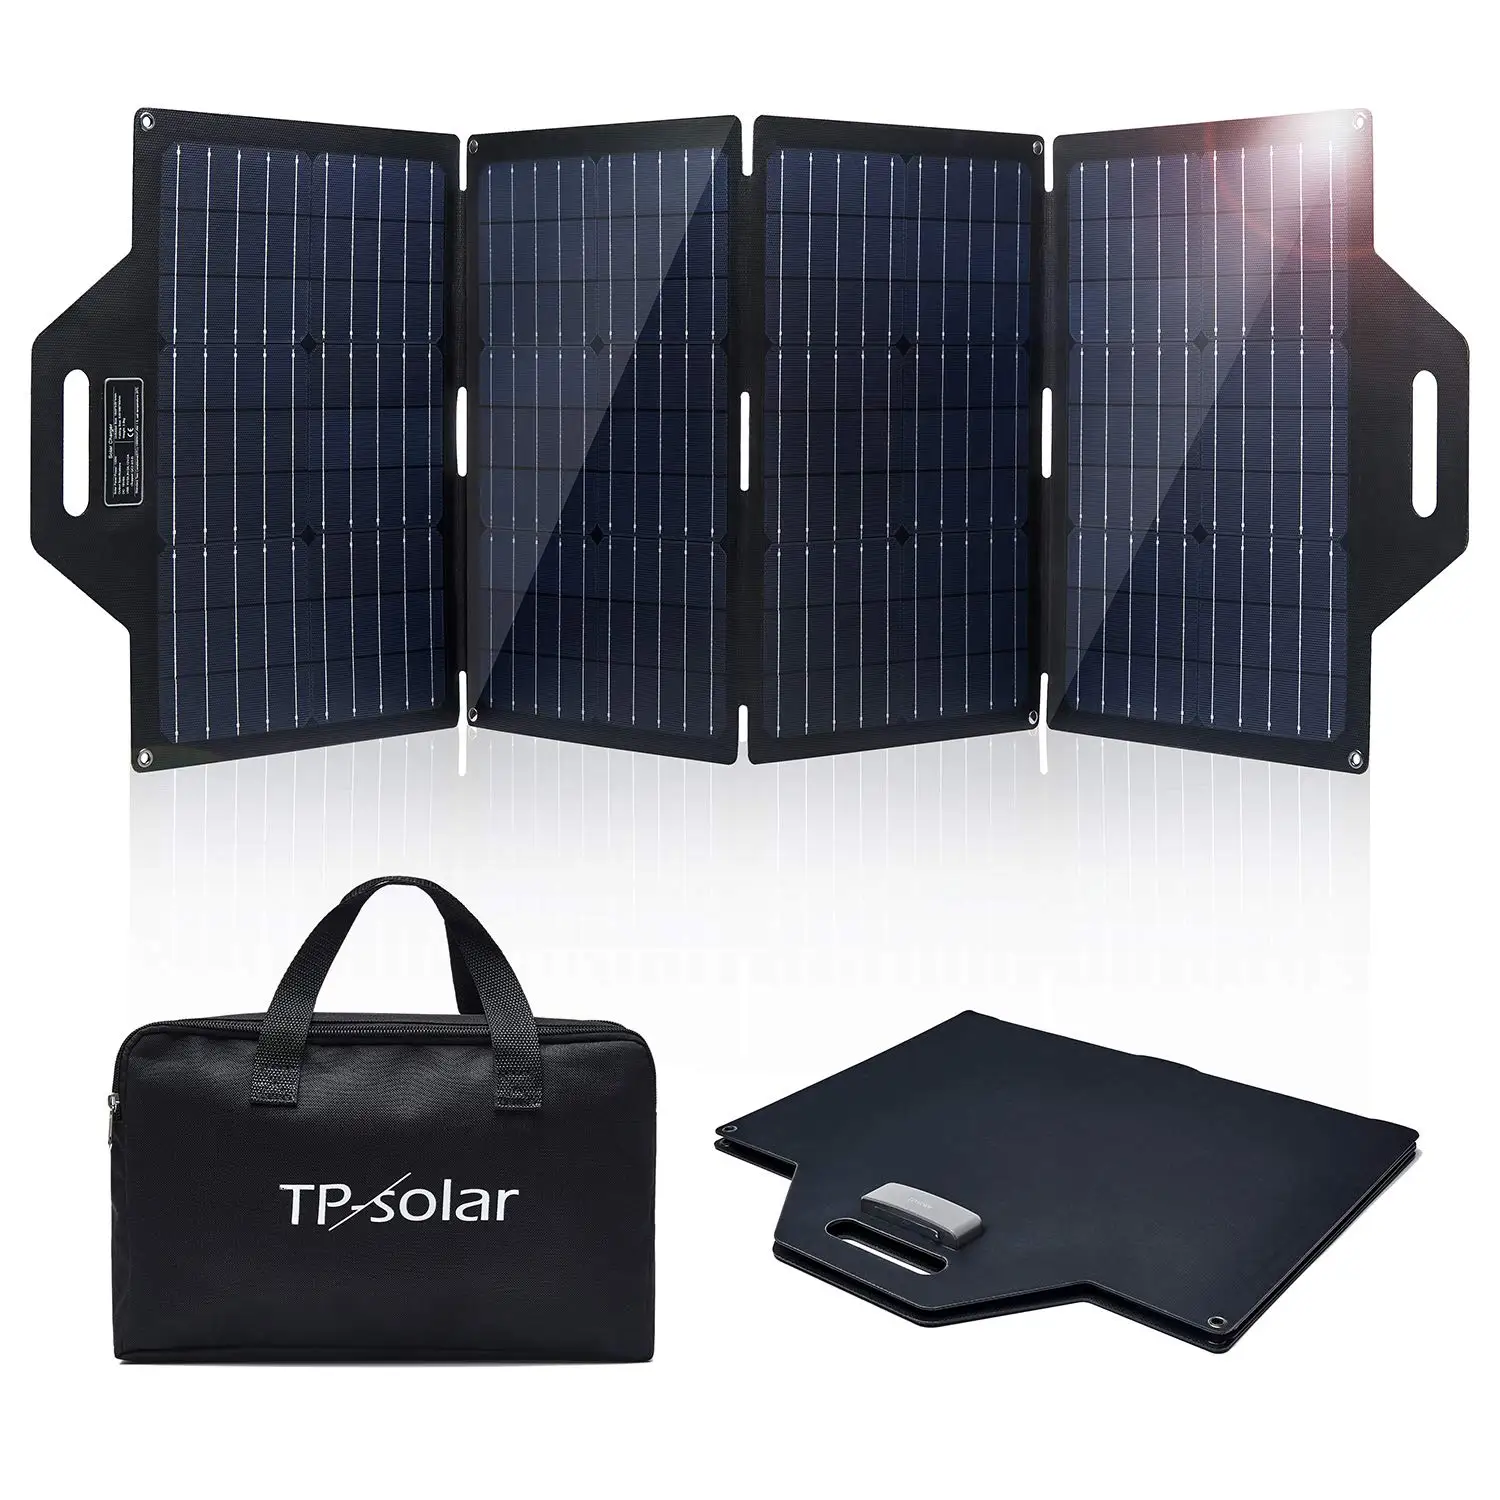 

Usb Charger Bag 5volt Flexible 95w Foldable Solar Panel For Powerbank With Folding In Support